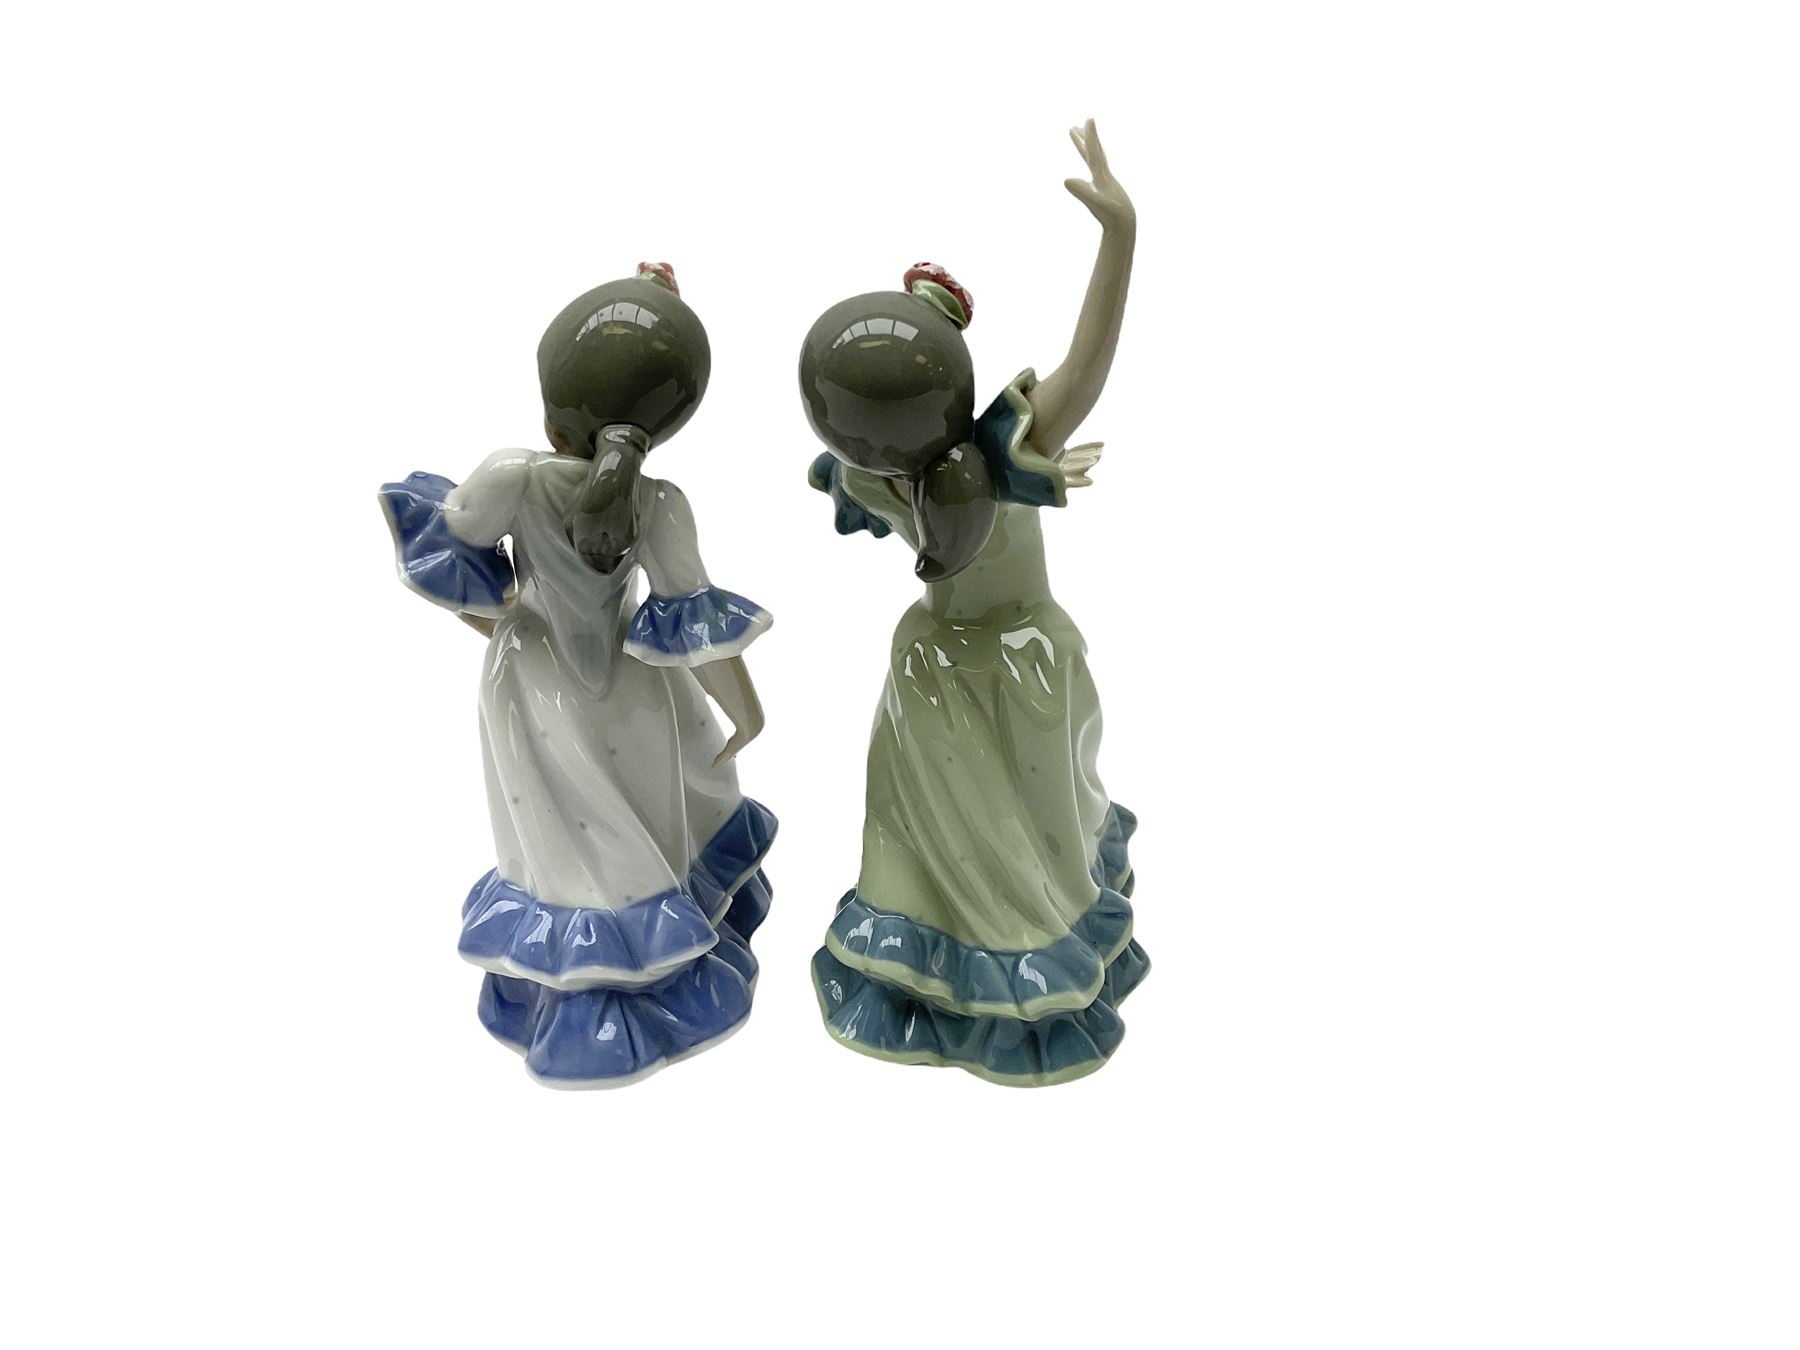 Lladro figure modelled as a female figure playing the flute - Image 8 of 9